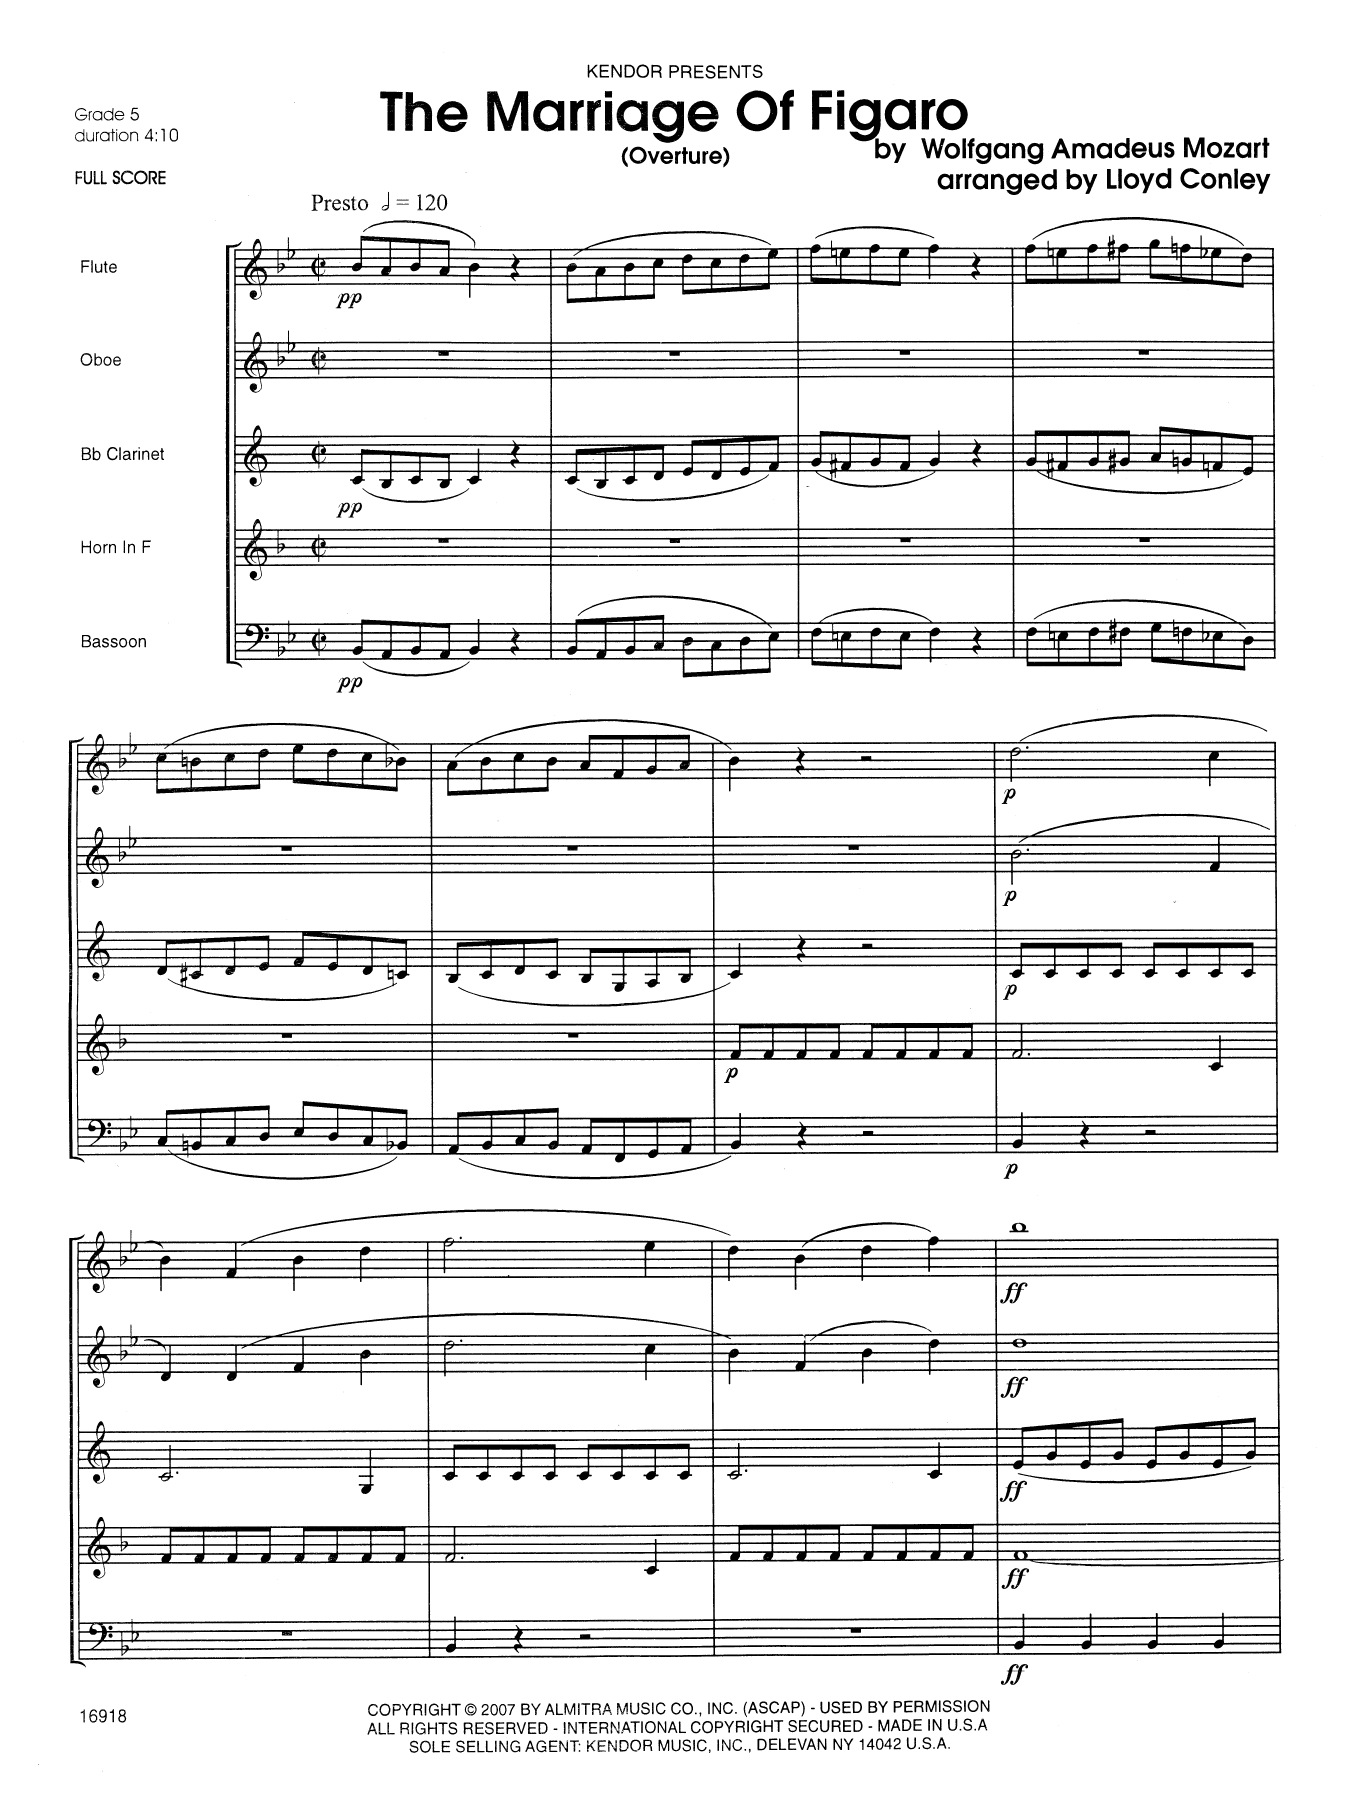 Lloyd Conley The Marriage Of Figaro (Overture) - Full Score sheet music notes and chords. Download Printable PDF.